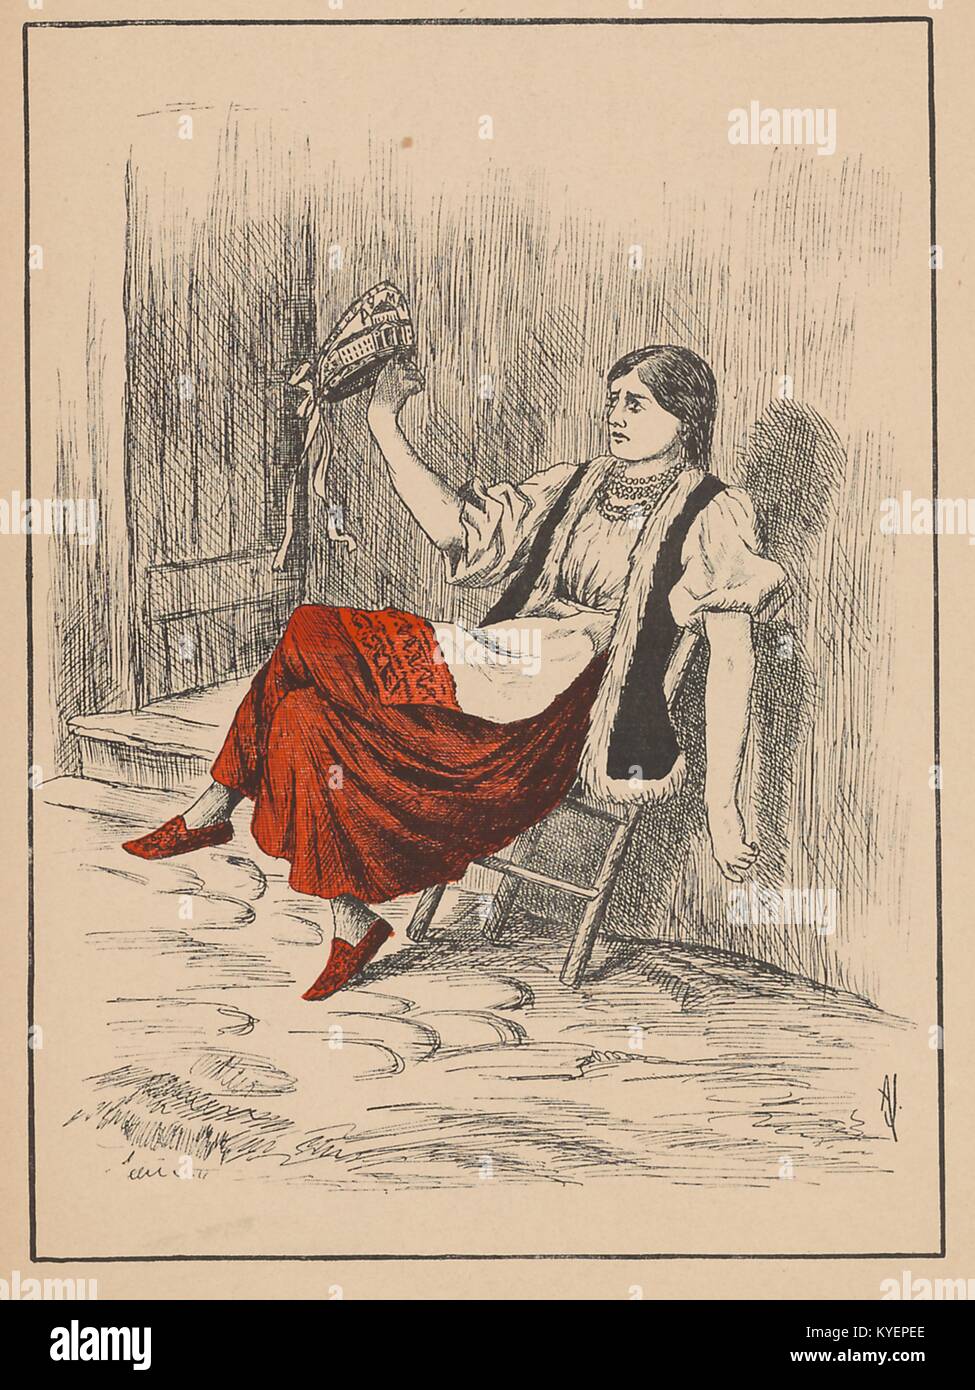 Illustration from the satirical Russian journal Ovod (Gadfly) depicting a young woman wearing a sarafan, a traditional Russian dress, leaning back in a chair in front of a house and looking in sadness at a kokoshnik, a traditional Russian headdress, in her hand; The headdress has a building drawn on it accompanied by the word 'Duma', referring to a Russian legislative house in the early 1900s, 1906. () Stock Photo